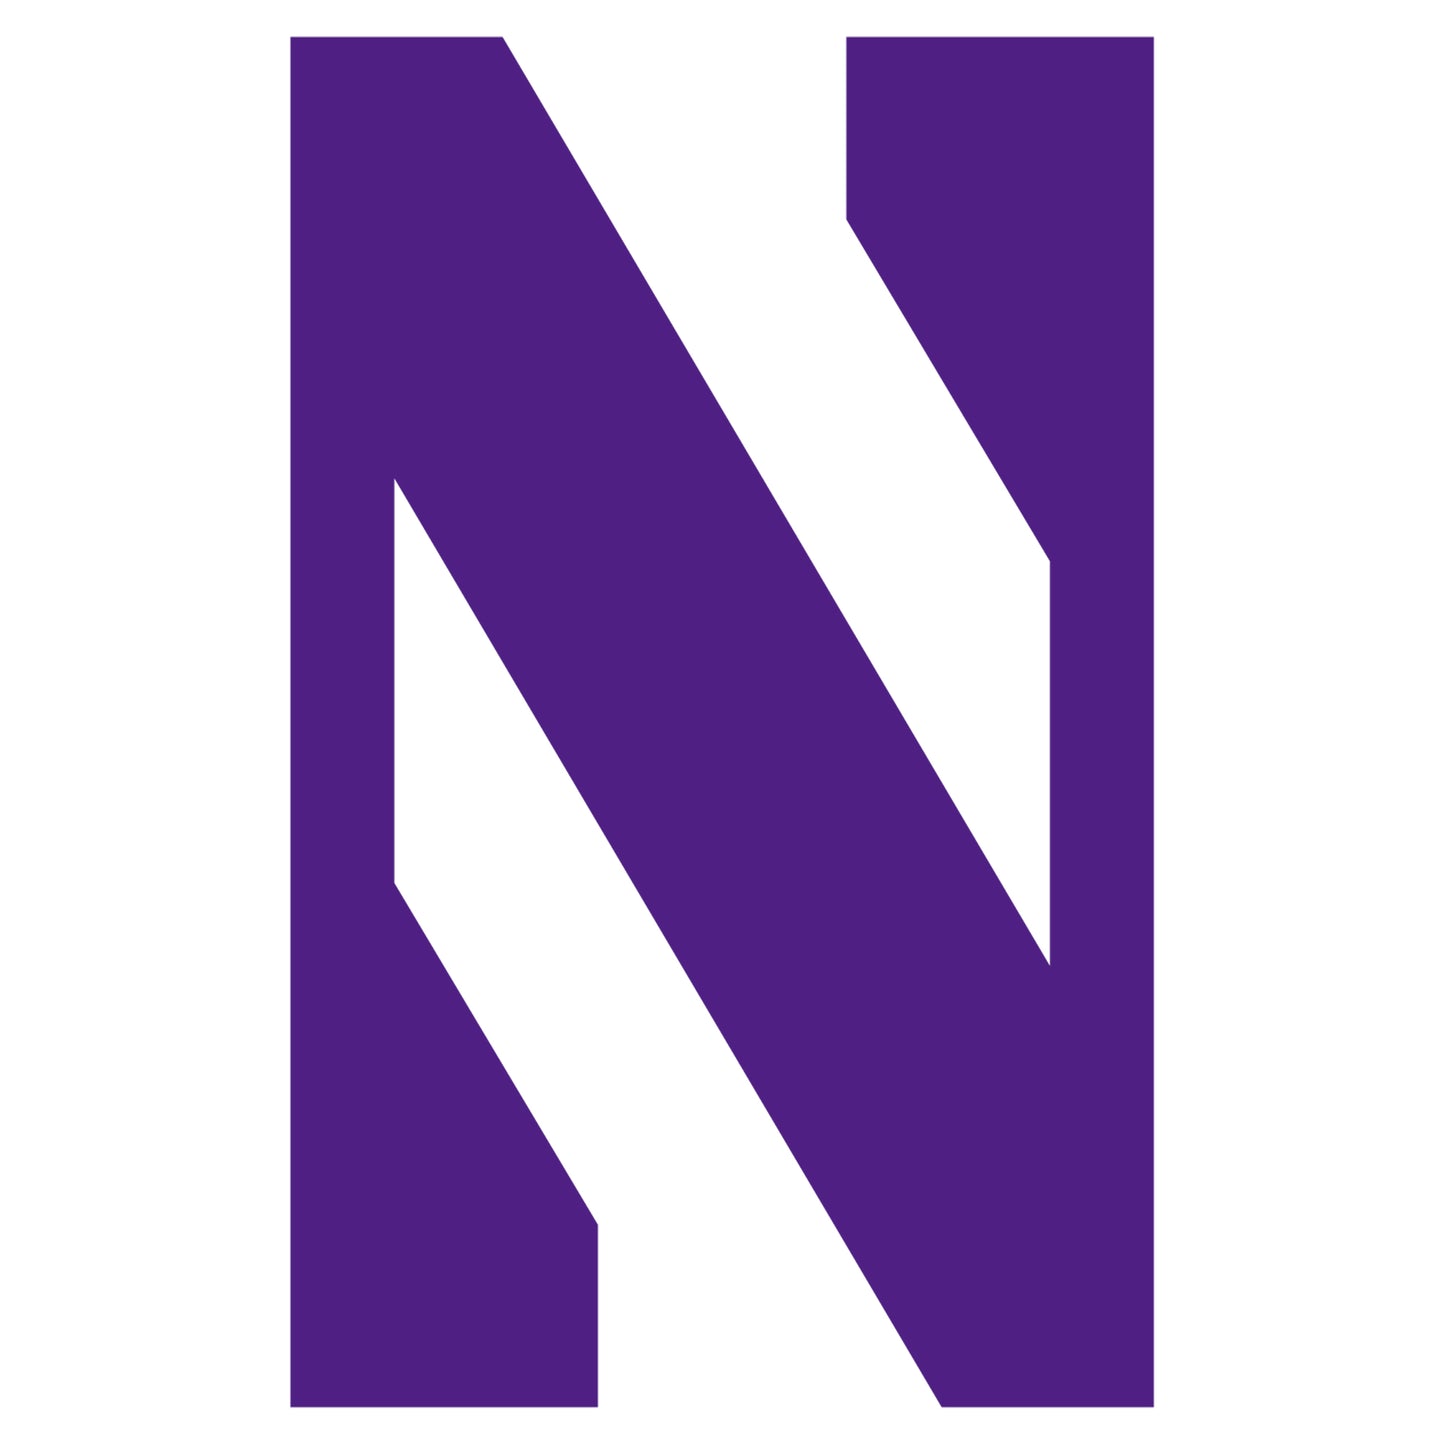 Sheet of 5 -Northwestern U: Northwestern Wildcats  Logo Minis        - Officially Licensed NCAA Removable    Adhesive Decal